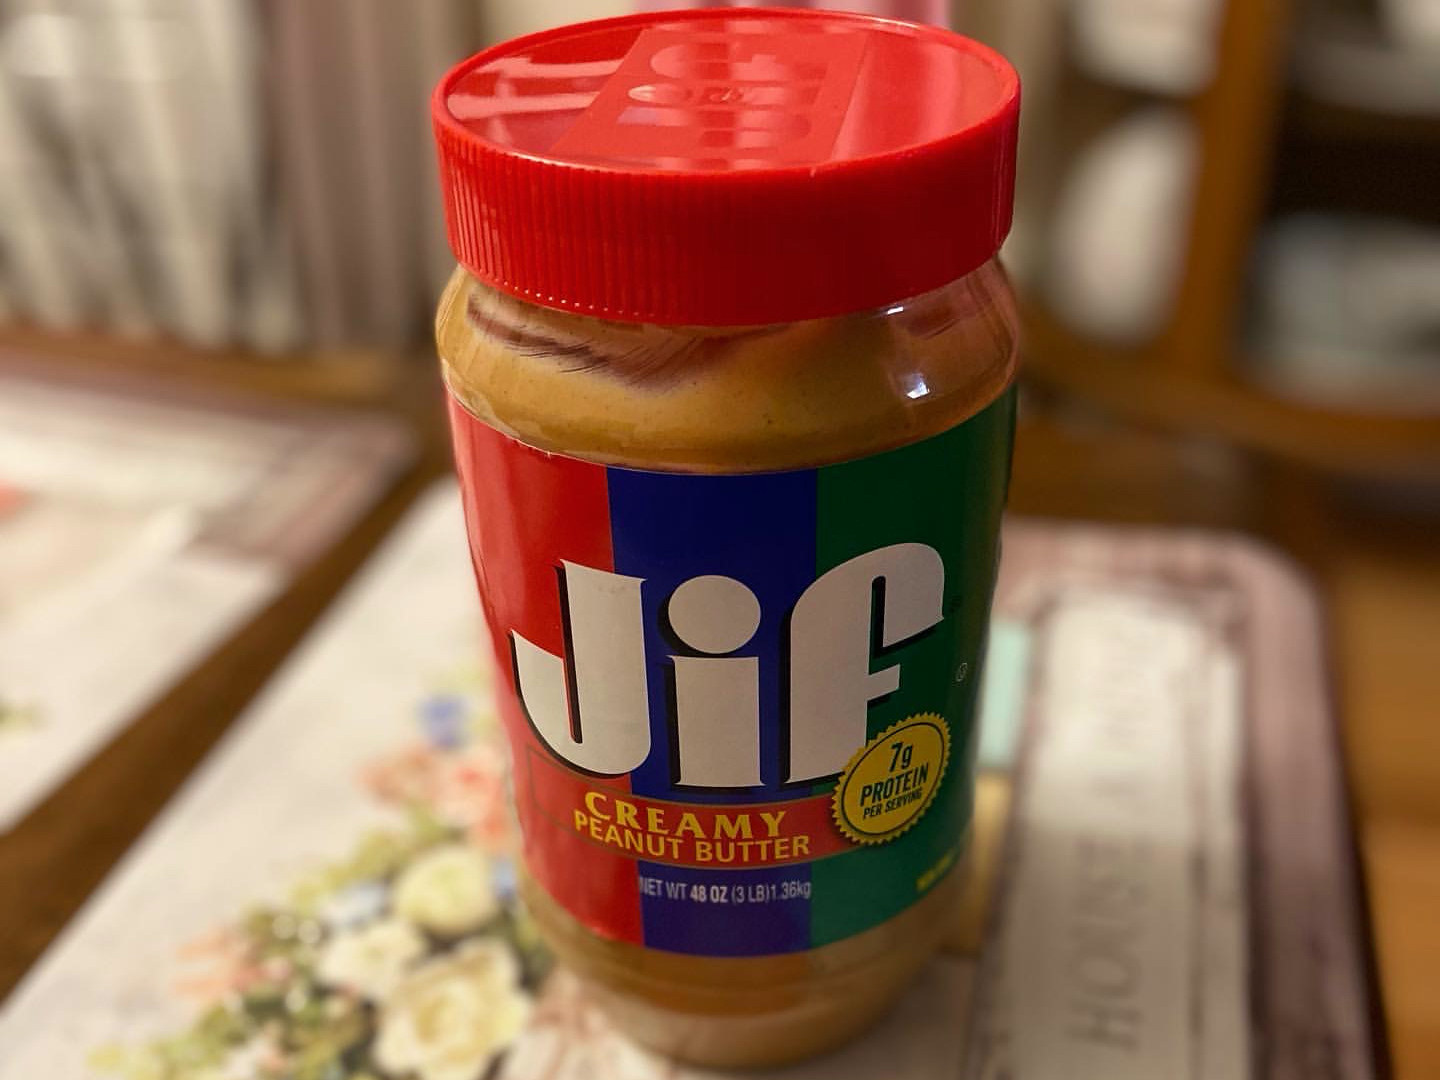 jif-peanut-butter-products-recalled-over-salmonella-concerns